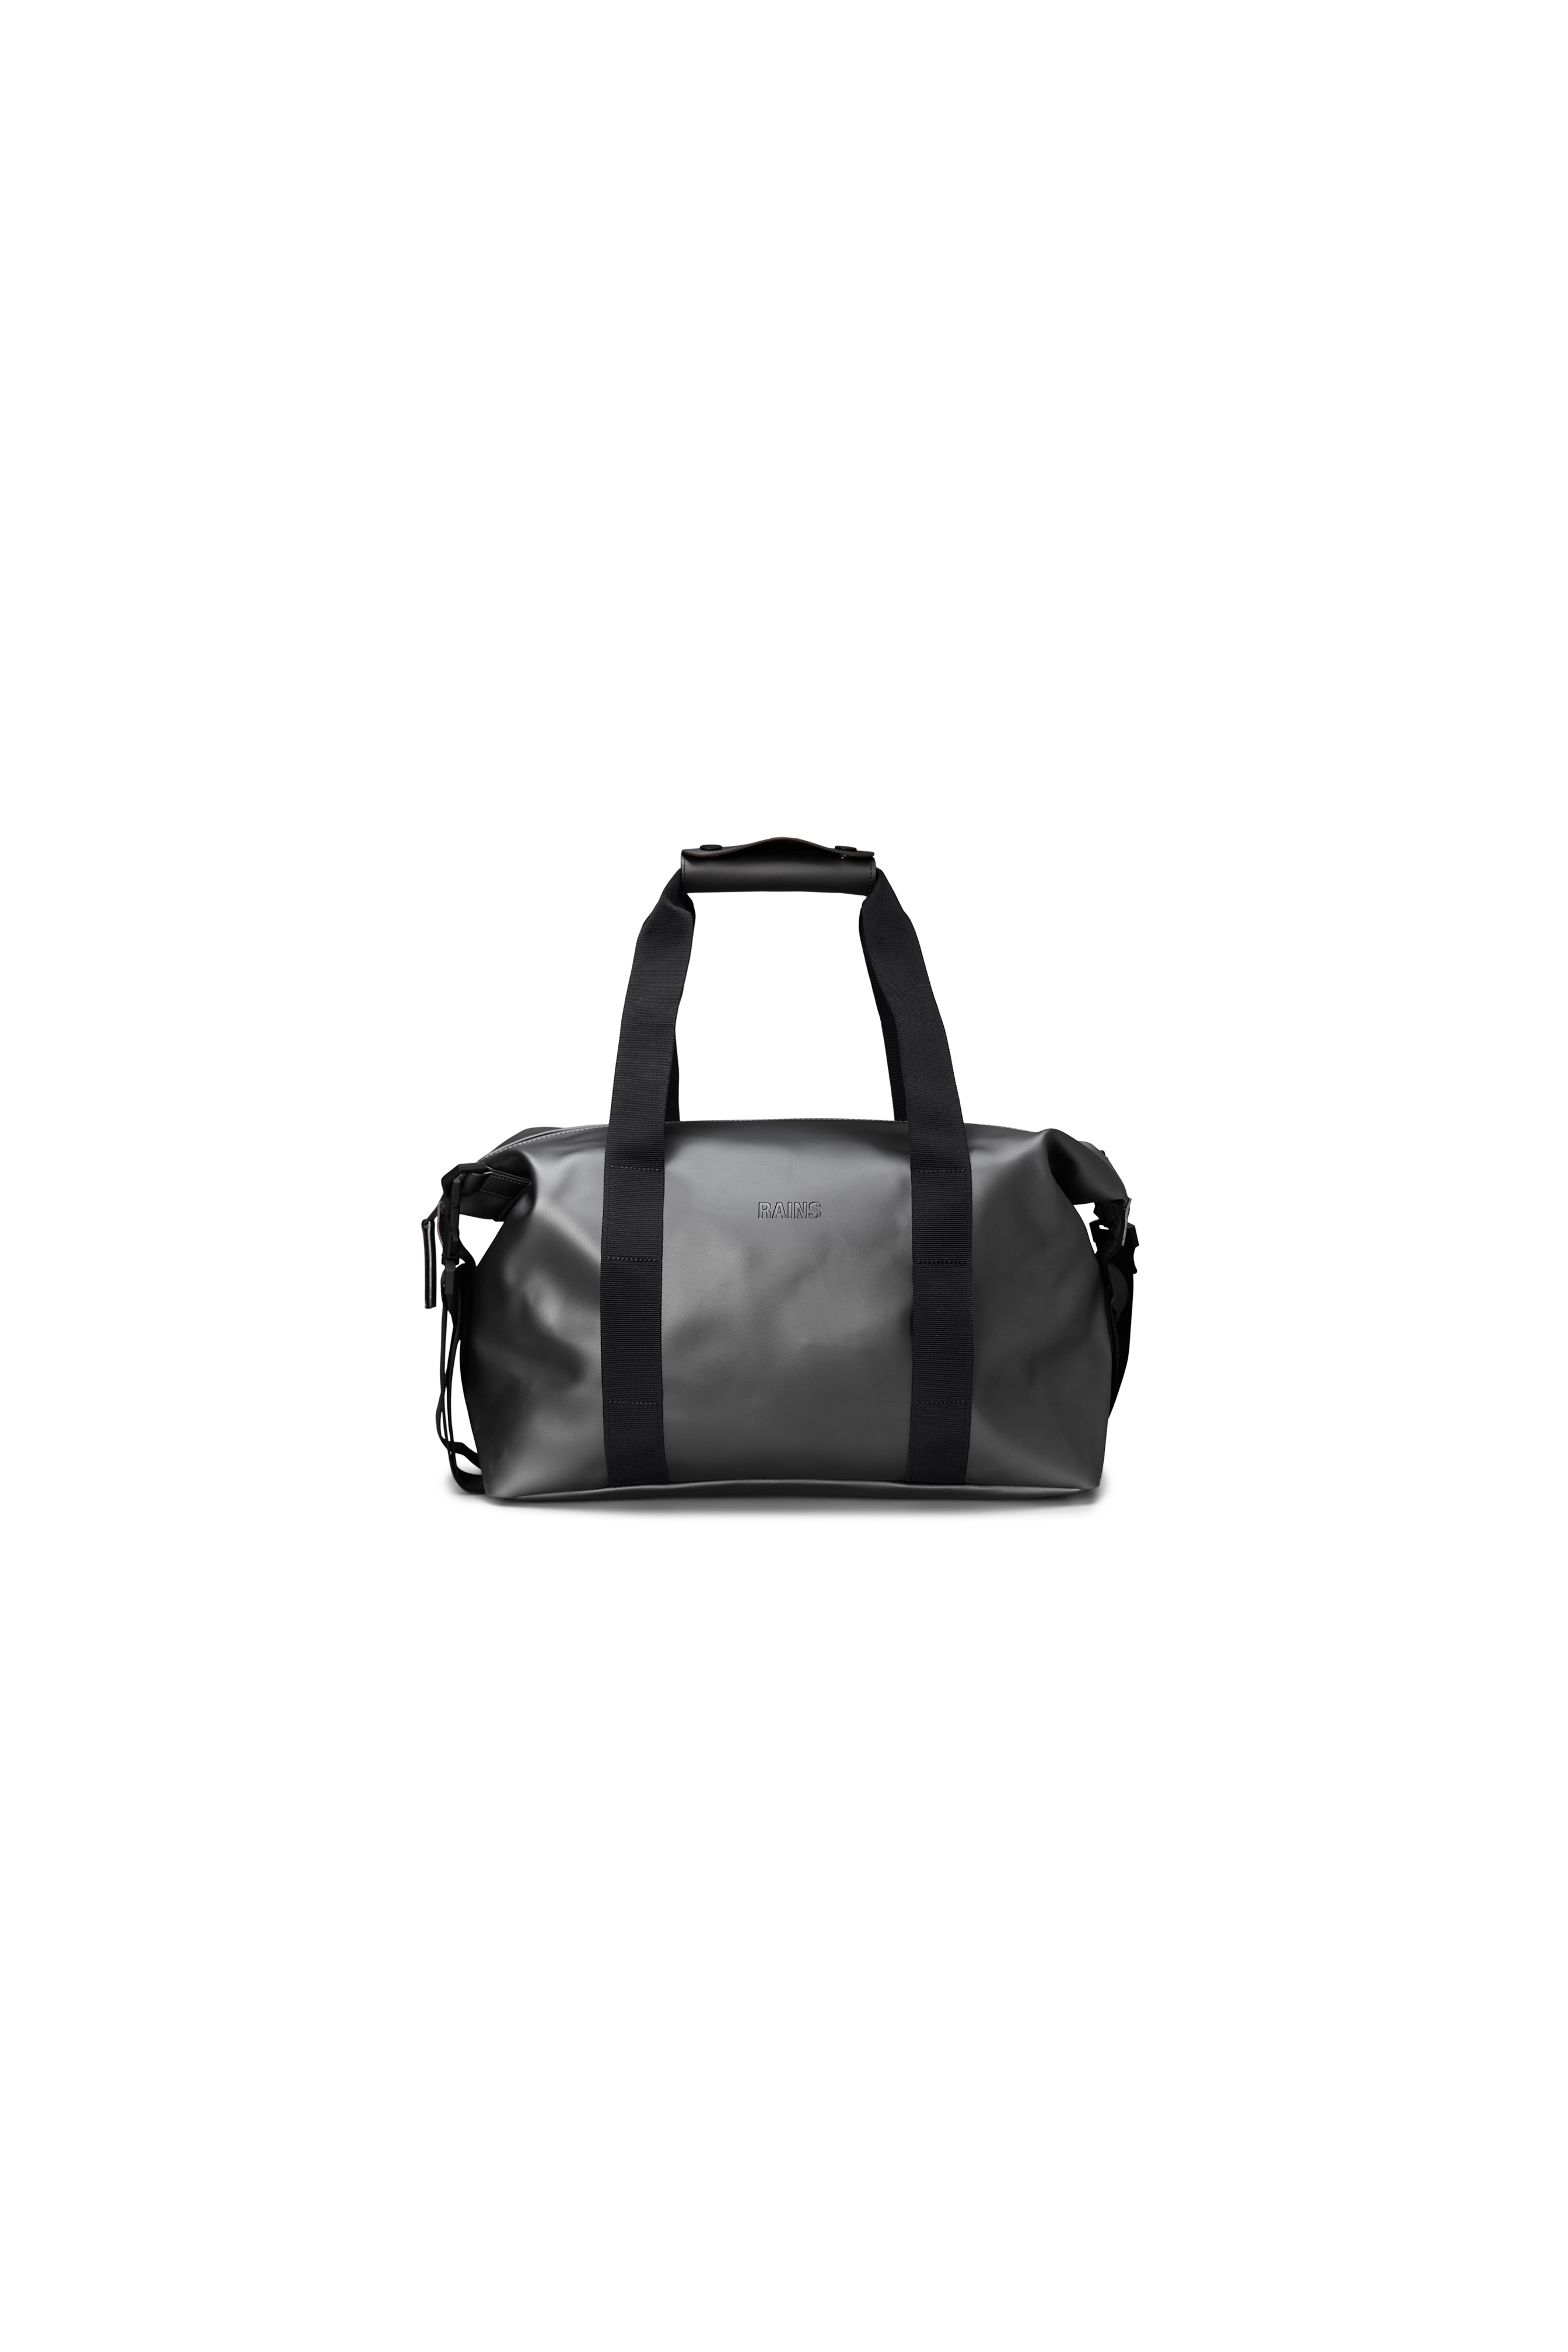 Rains® Hilo Weekend Bag Small in Metallic Grey for $140 | Free Shipping